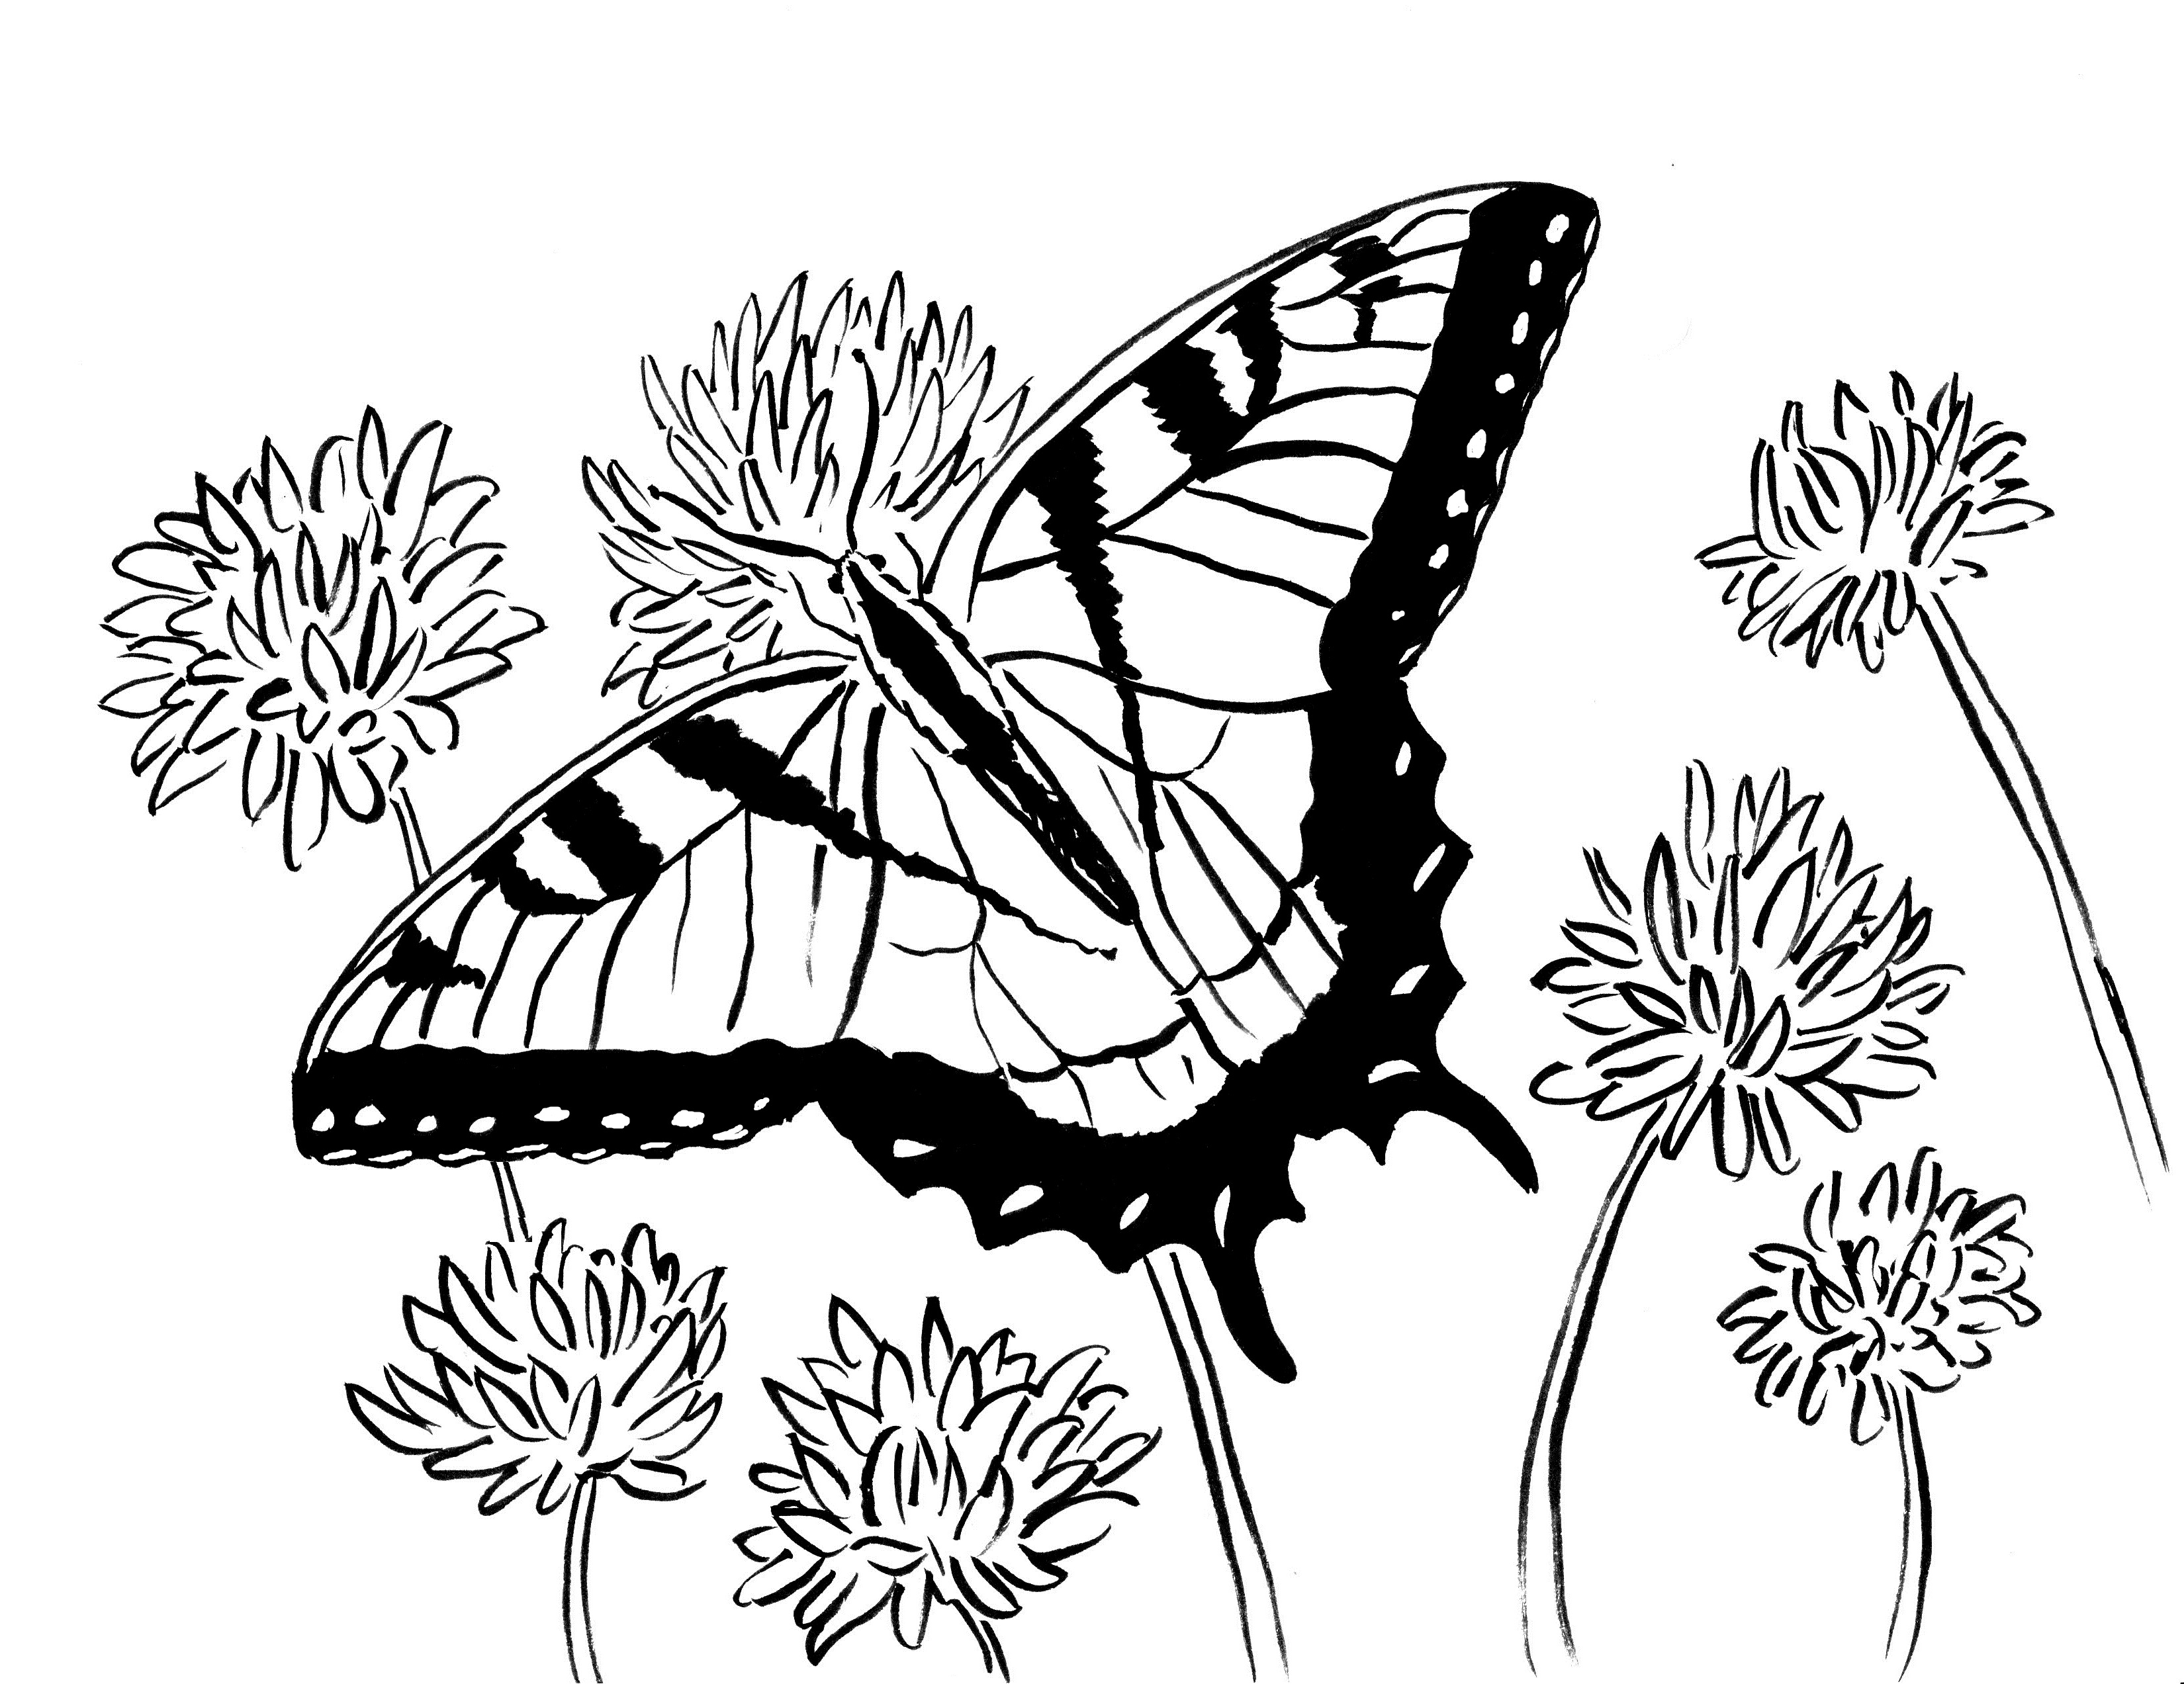 swallowtail-butterfly-coloring-page-art-starts